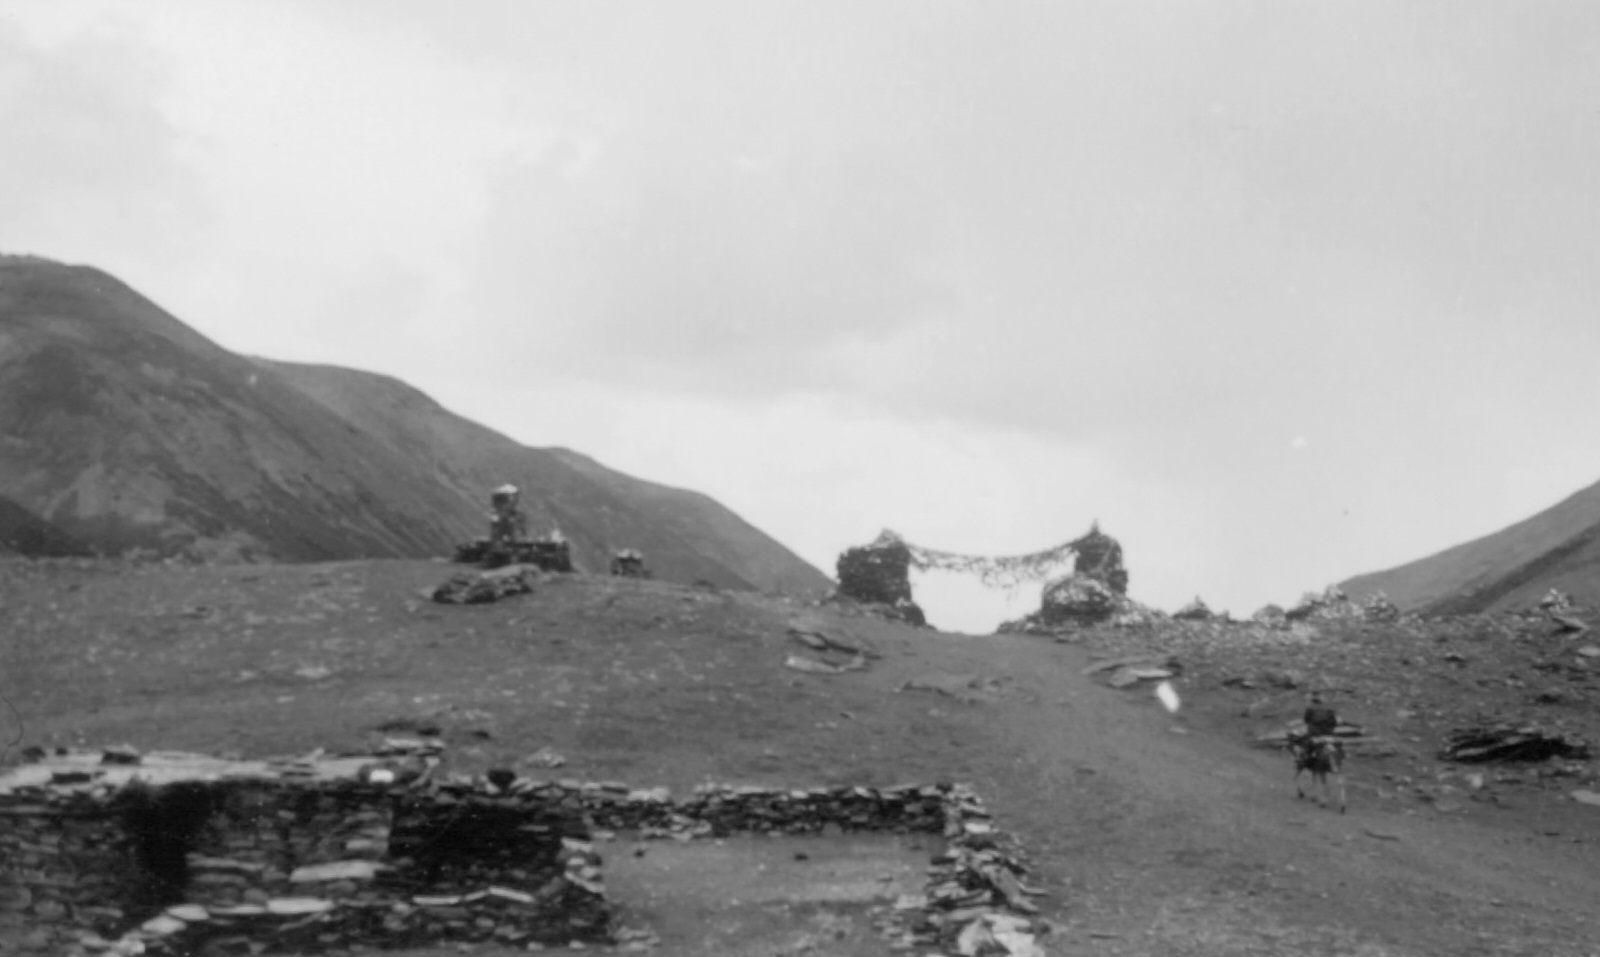 Archway of Stones and Prayer Flags Over the Pass of Kharo-la, 1944. Archway of stones and prayer flags over the 16,400 foot pass of Kharo-la, on road to Lhasa.